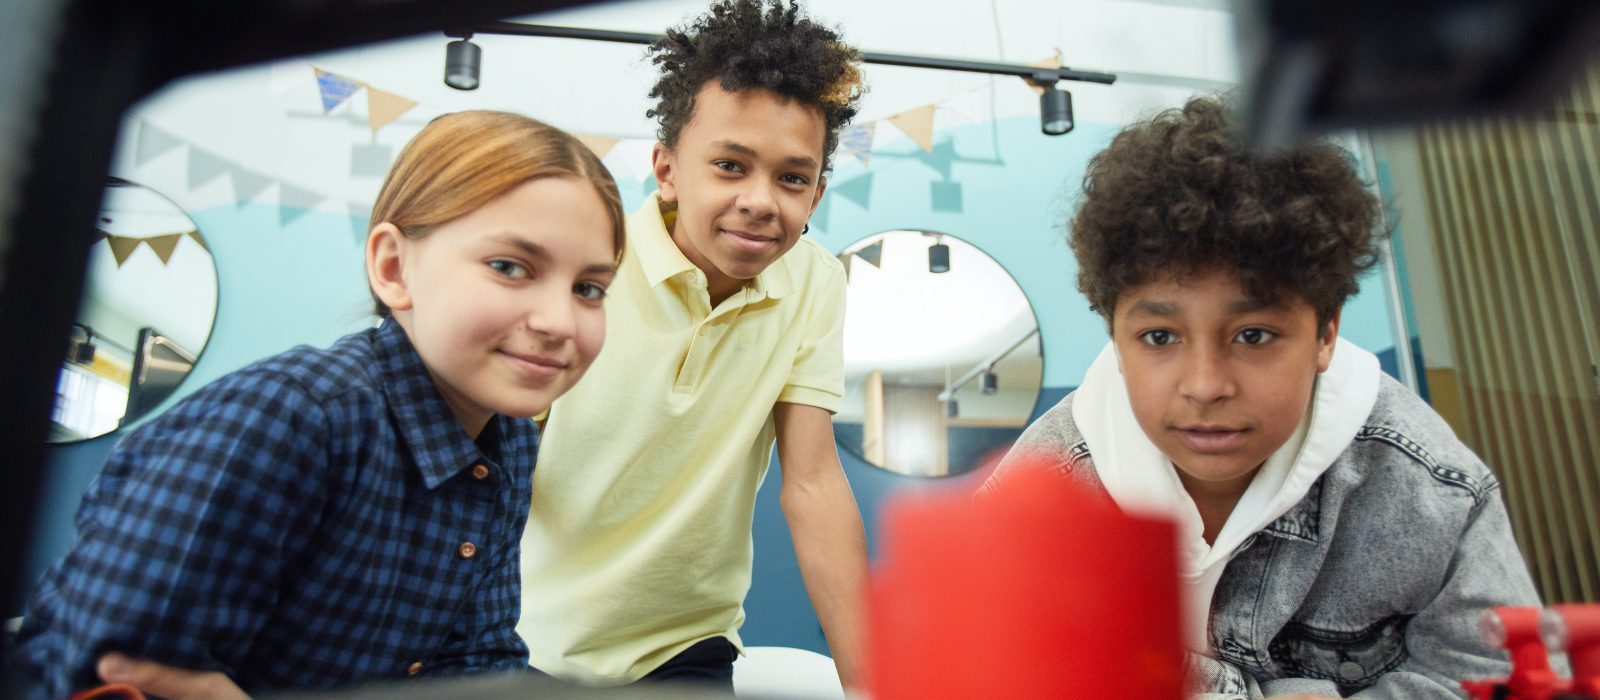 Go Full STEAM Ahead This Summer with STEM Matters NYC